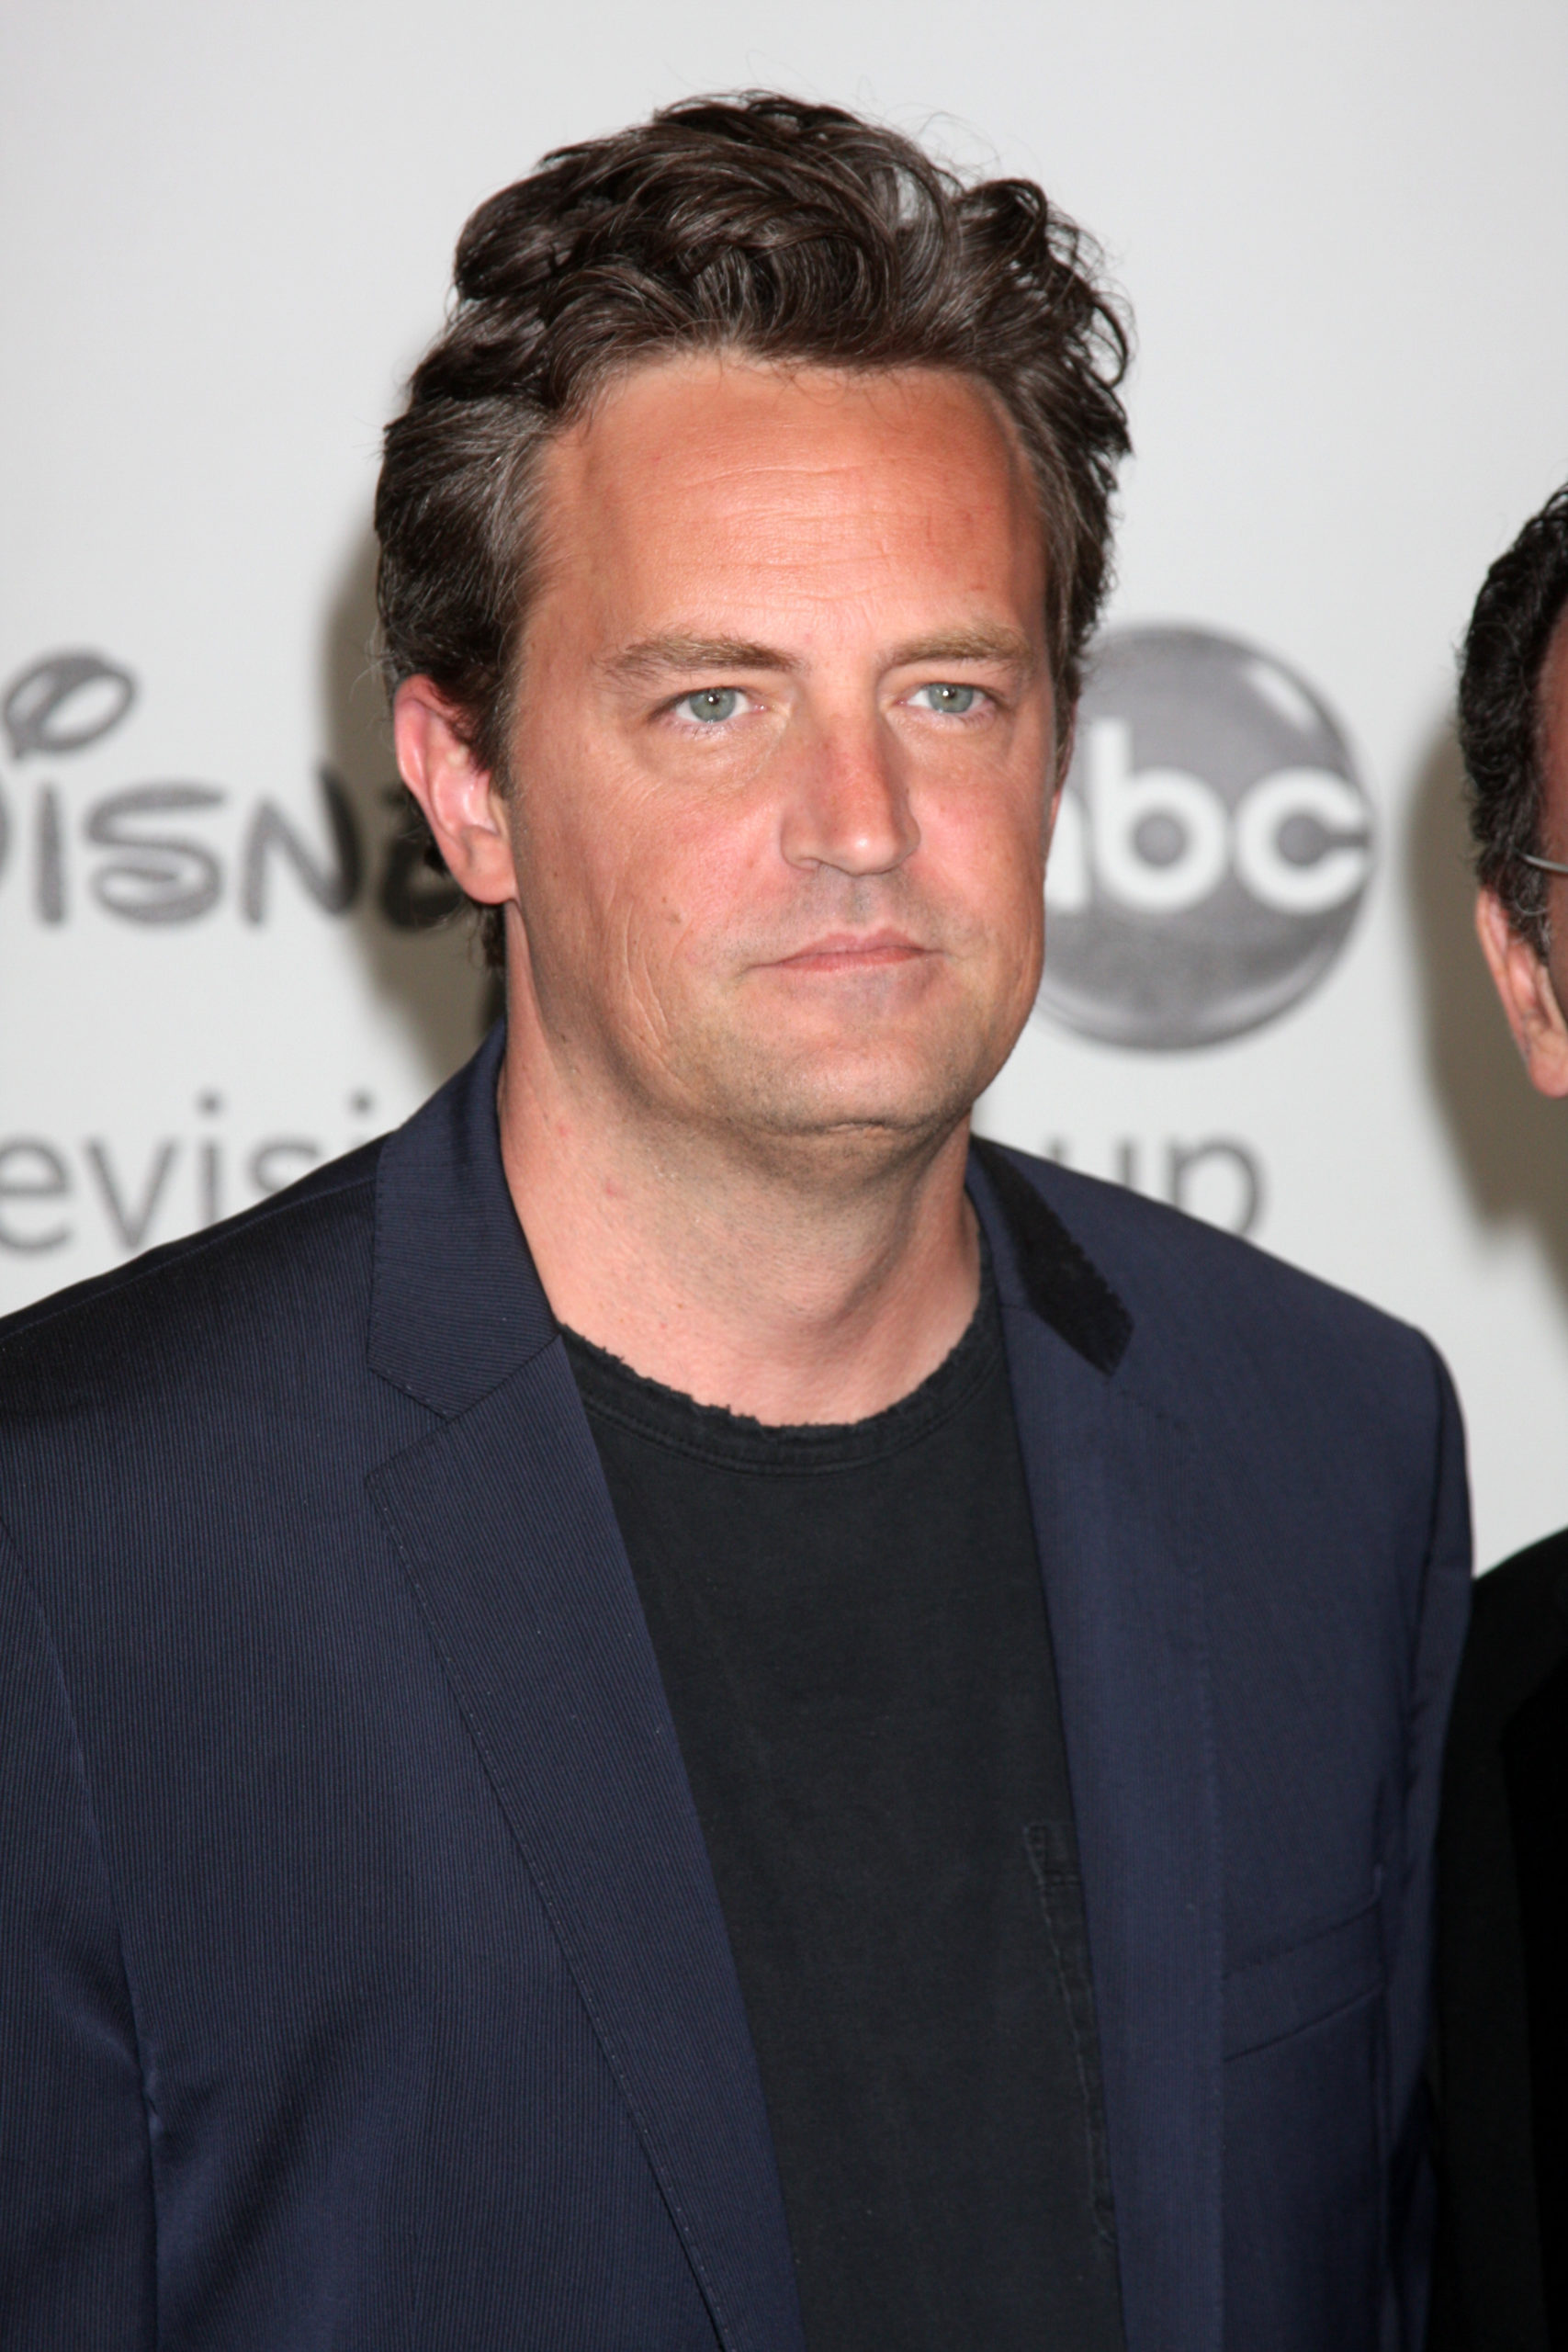 Matthew Perry's Ex-Fiancé Shares Heartbreaking Statement Following His Tragic Passing | Matthew Perry’s former fiancé has spoken out.